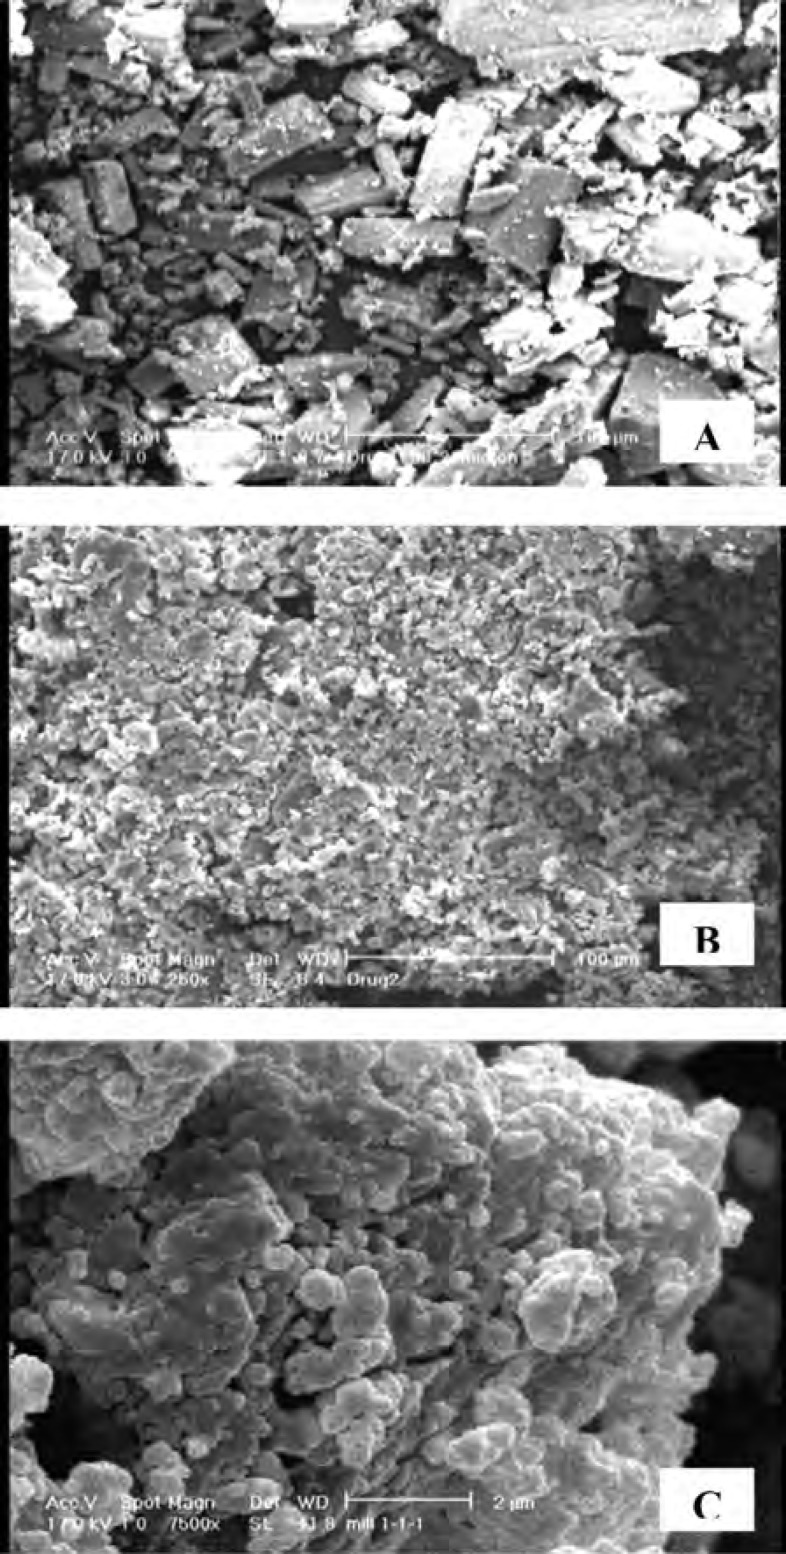 Scanning electron micrographs of: A) untreated CLA (× 250), B) co-ground sample (S6) (× 250) and C) co-ground sample (S6) (× 7500).